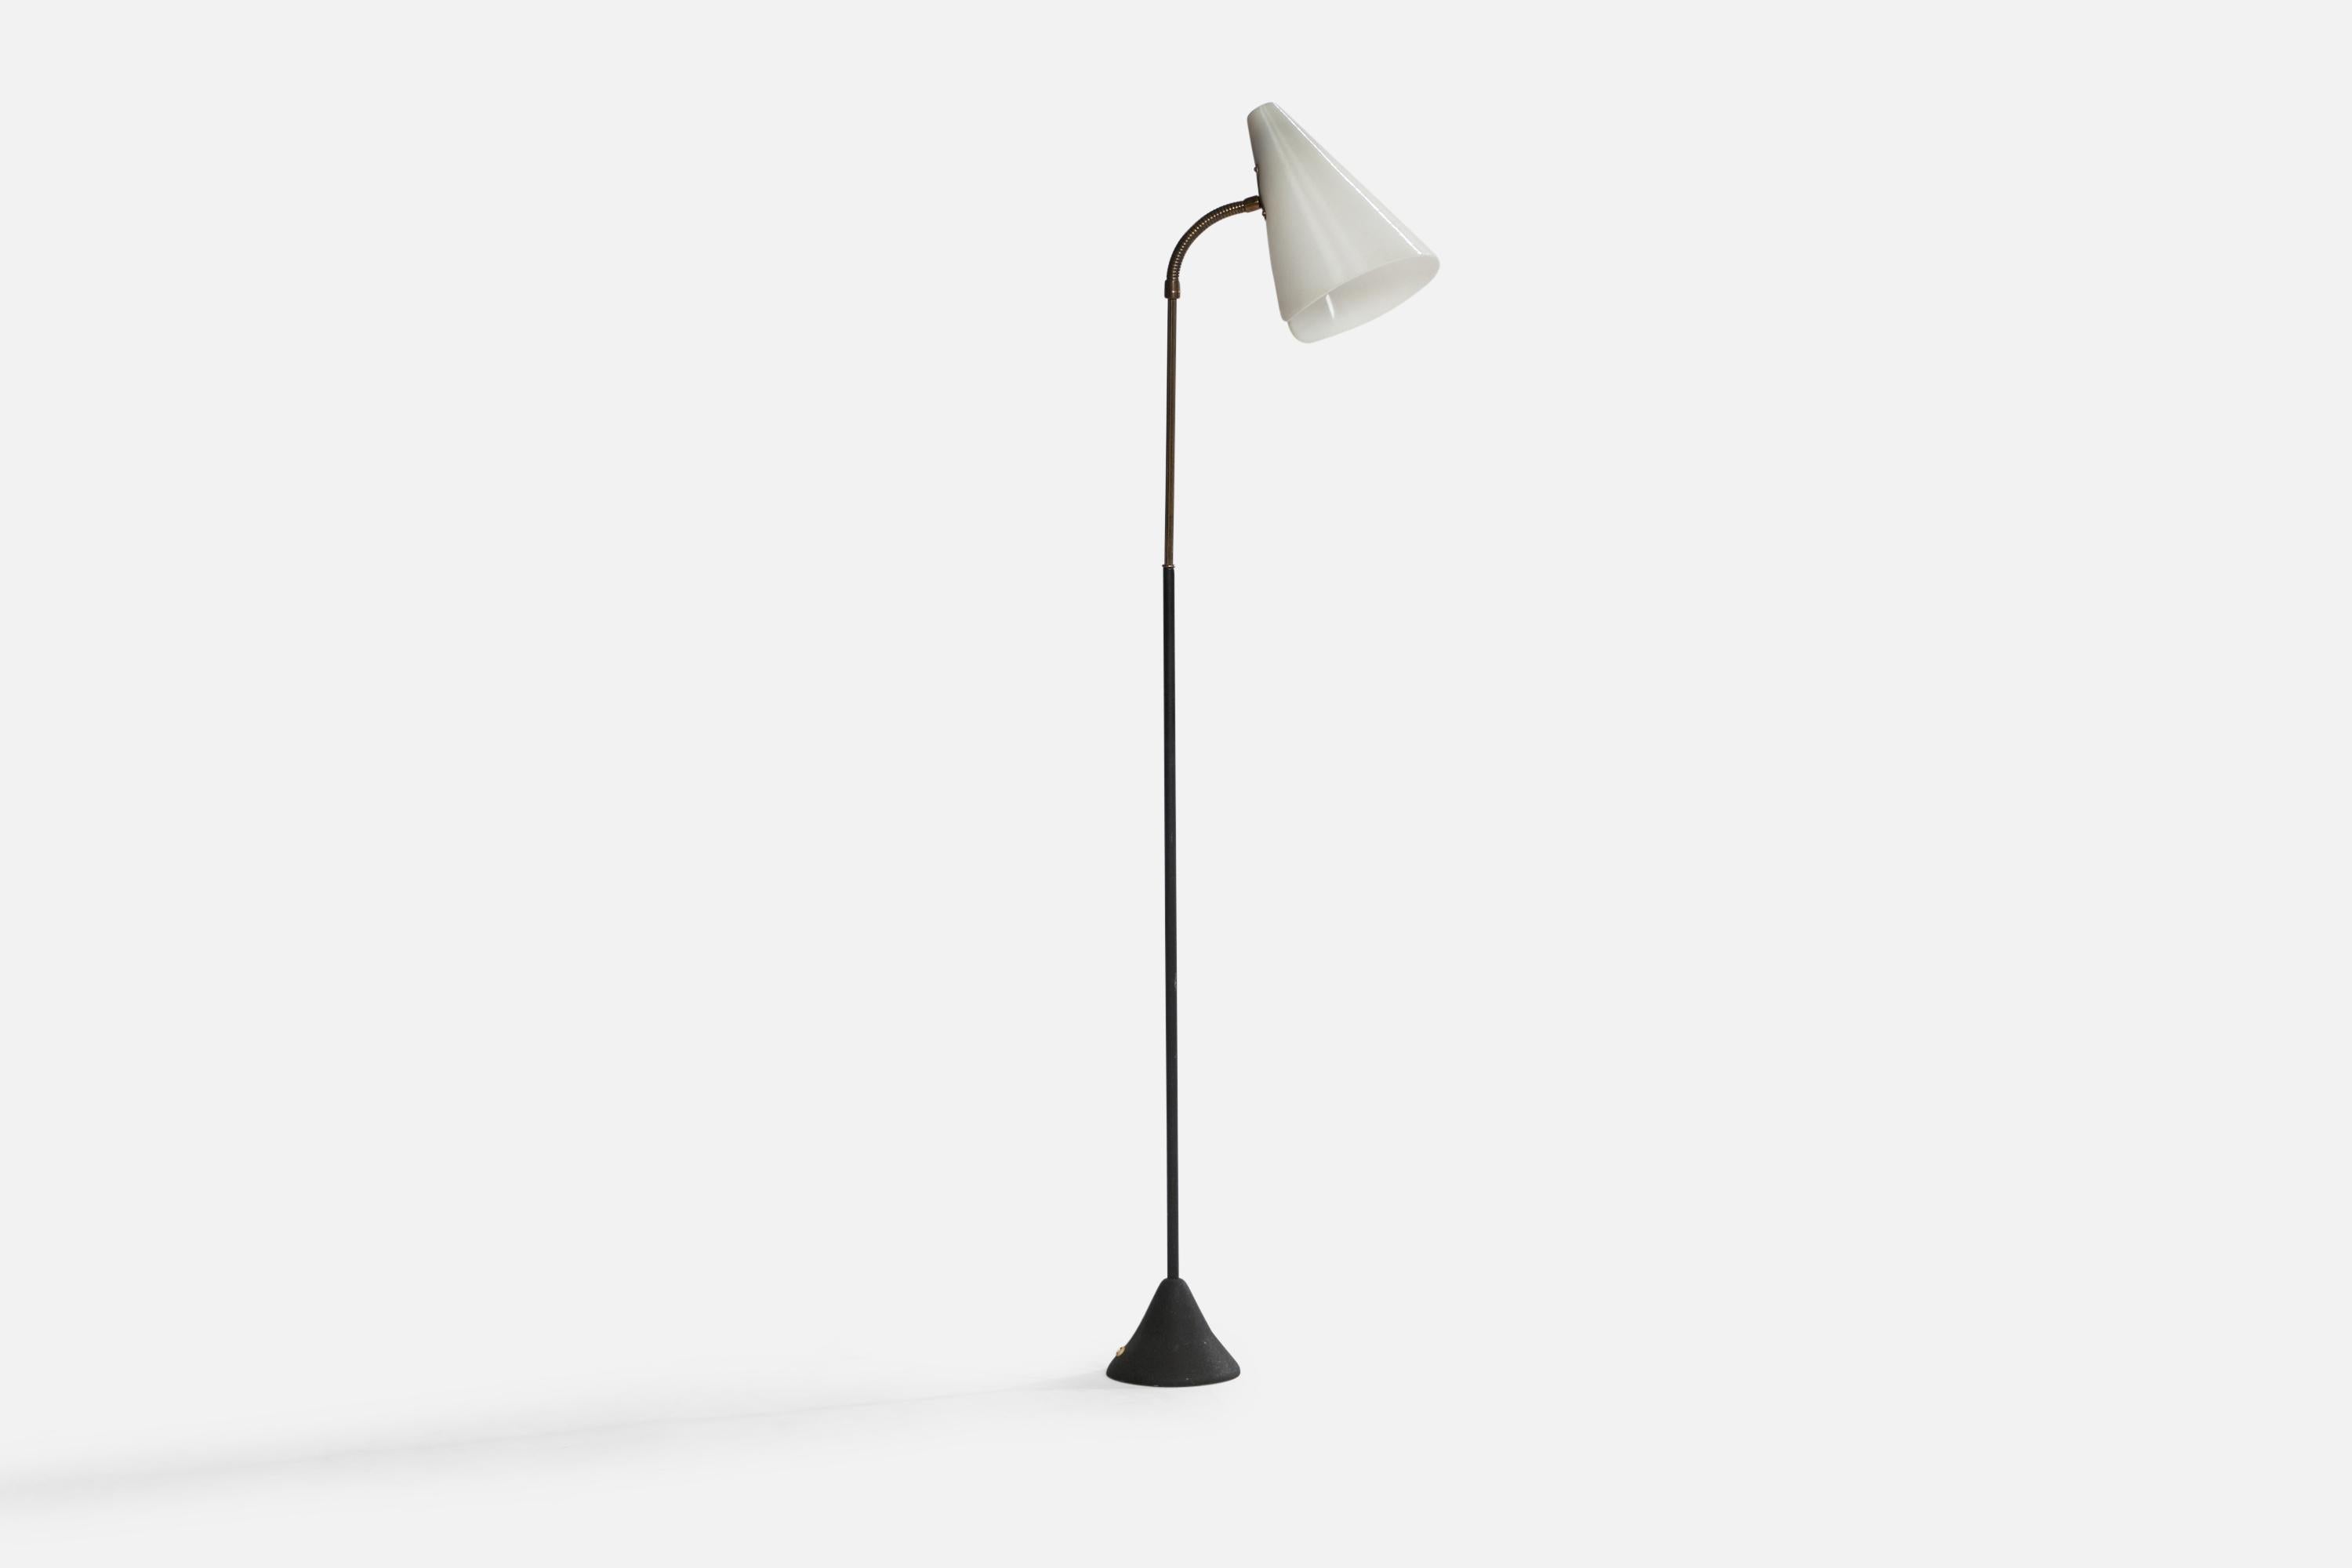 An adjustable brass, acrylic and black-lacquered metal floor lamp designed and produced in Sweden, 1950s.

Overall Dimensions (inches): 52.05” x 7.05” W x 14.45” D. 
Dimensions vary based on position of lights.
Bulb Specifications: E-26 Bulb
Number